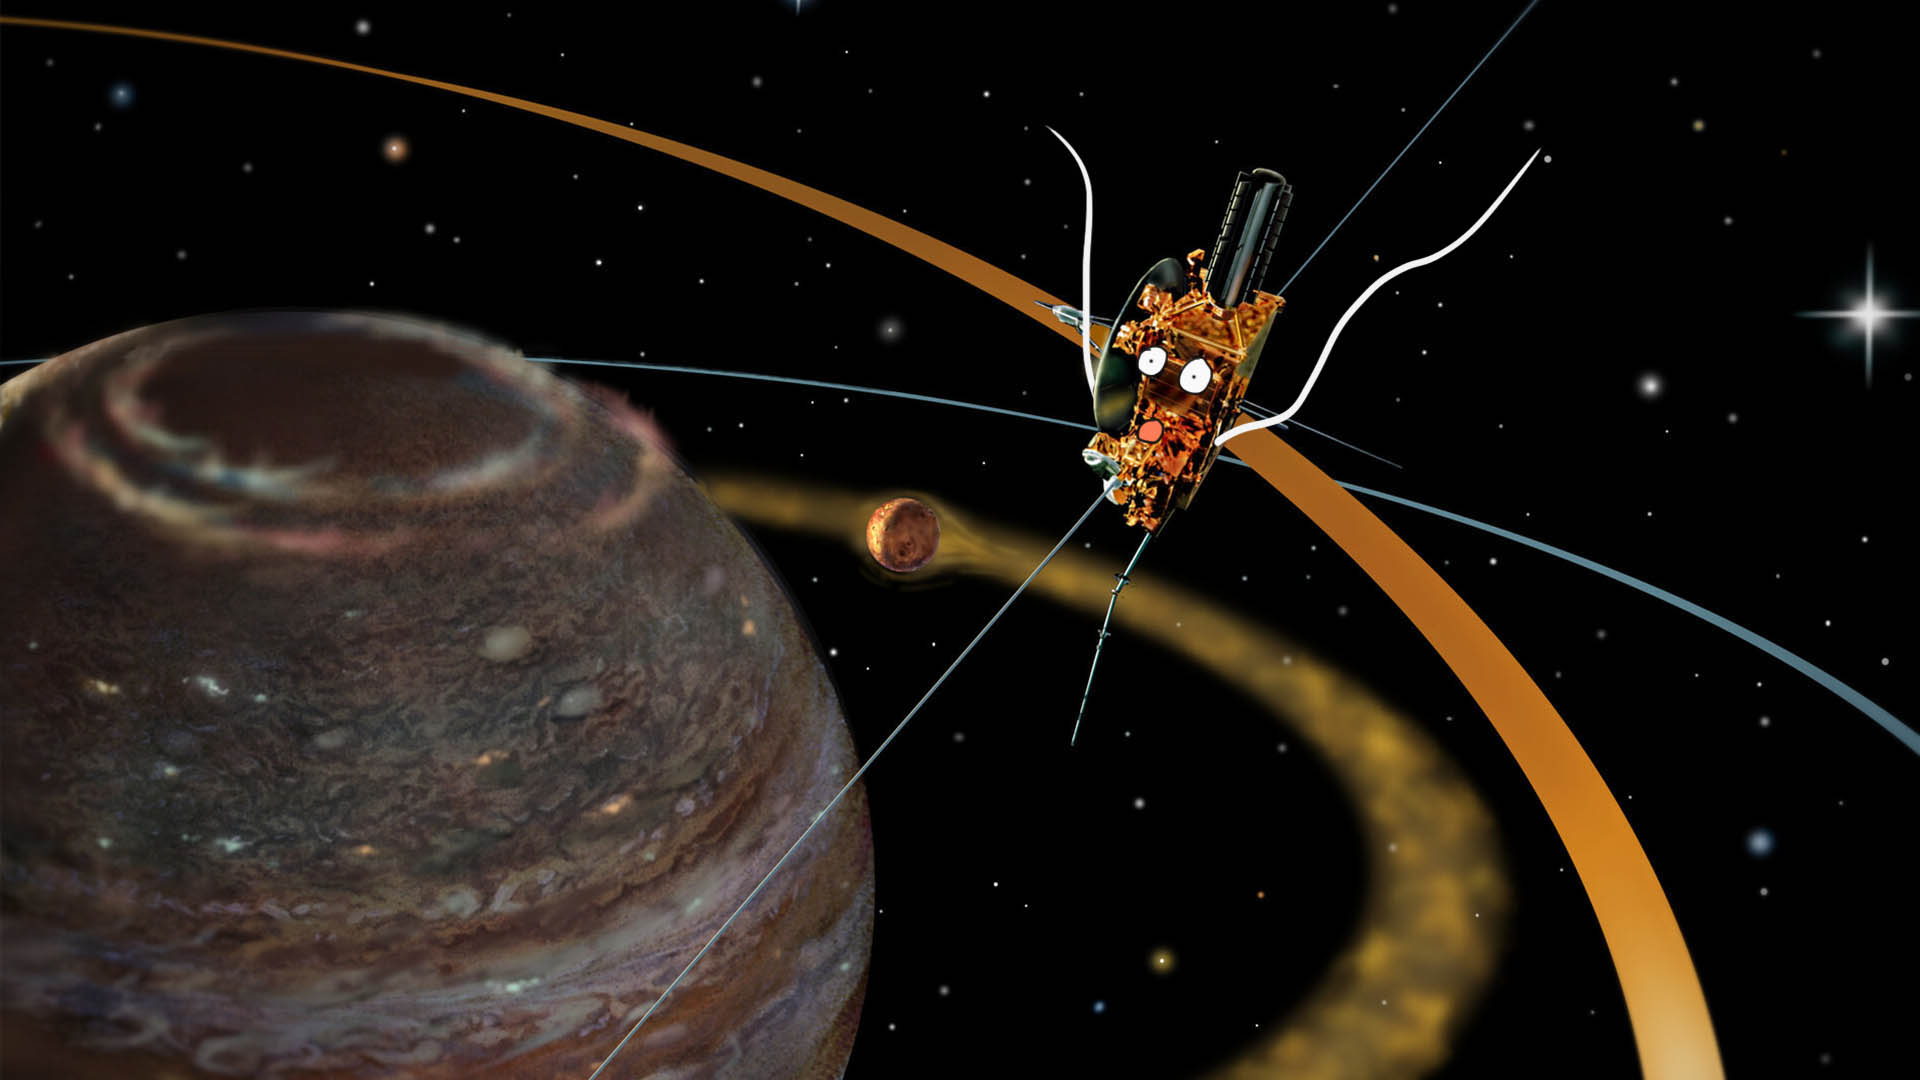 Another probe (maybe) escapes from the solar system